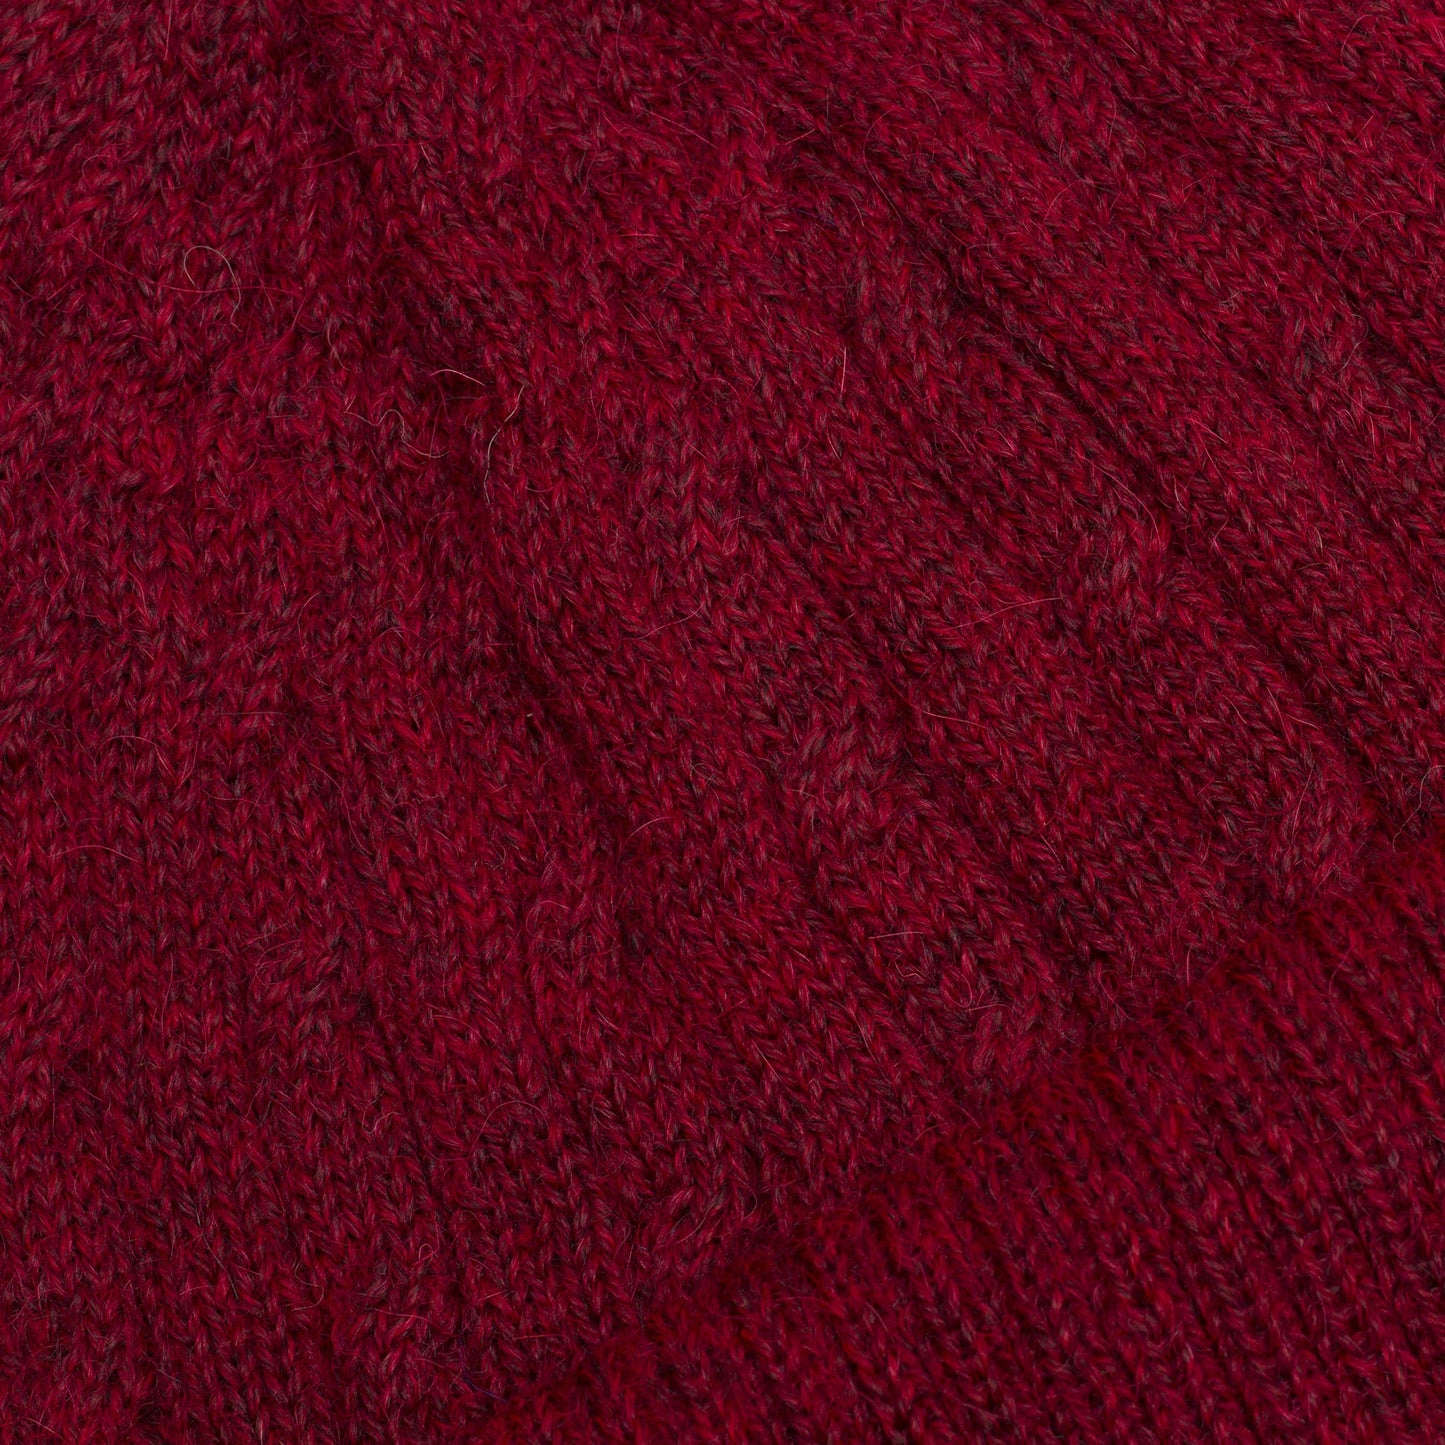 Comfy in Burgundy Cranberry Red 100% Alpaca Soft Cable Knit Hat from Peru